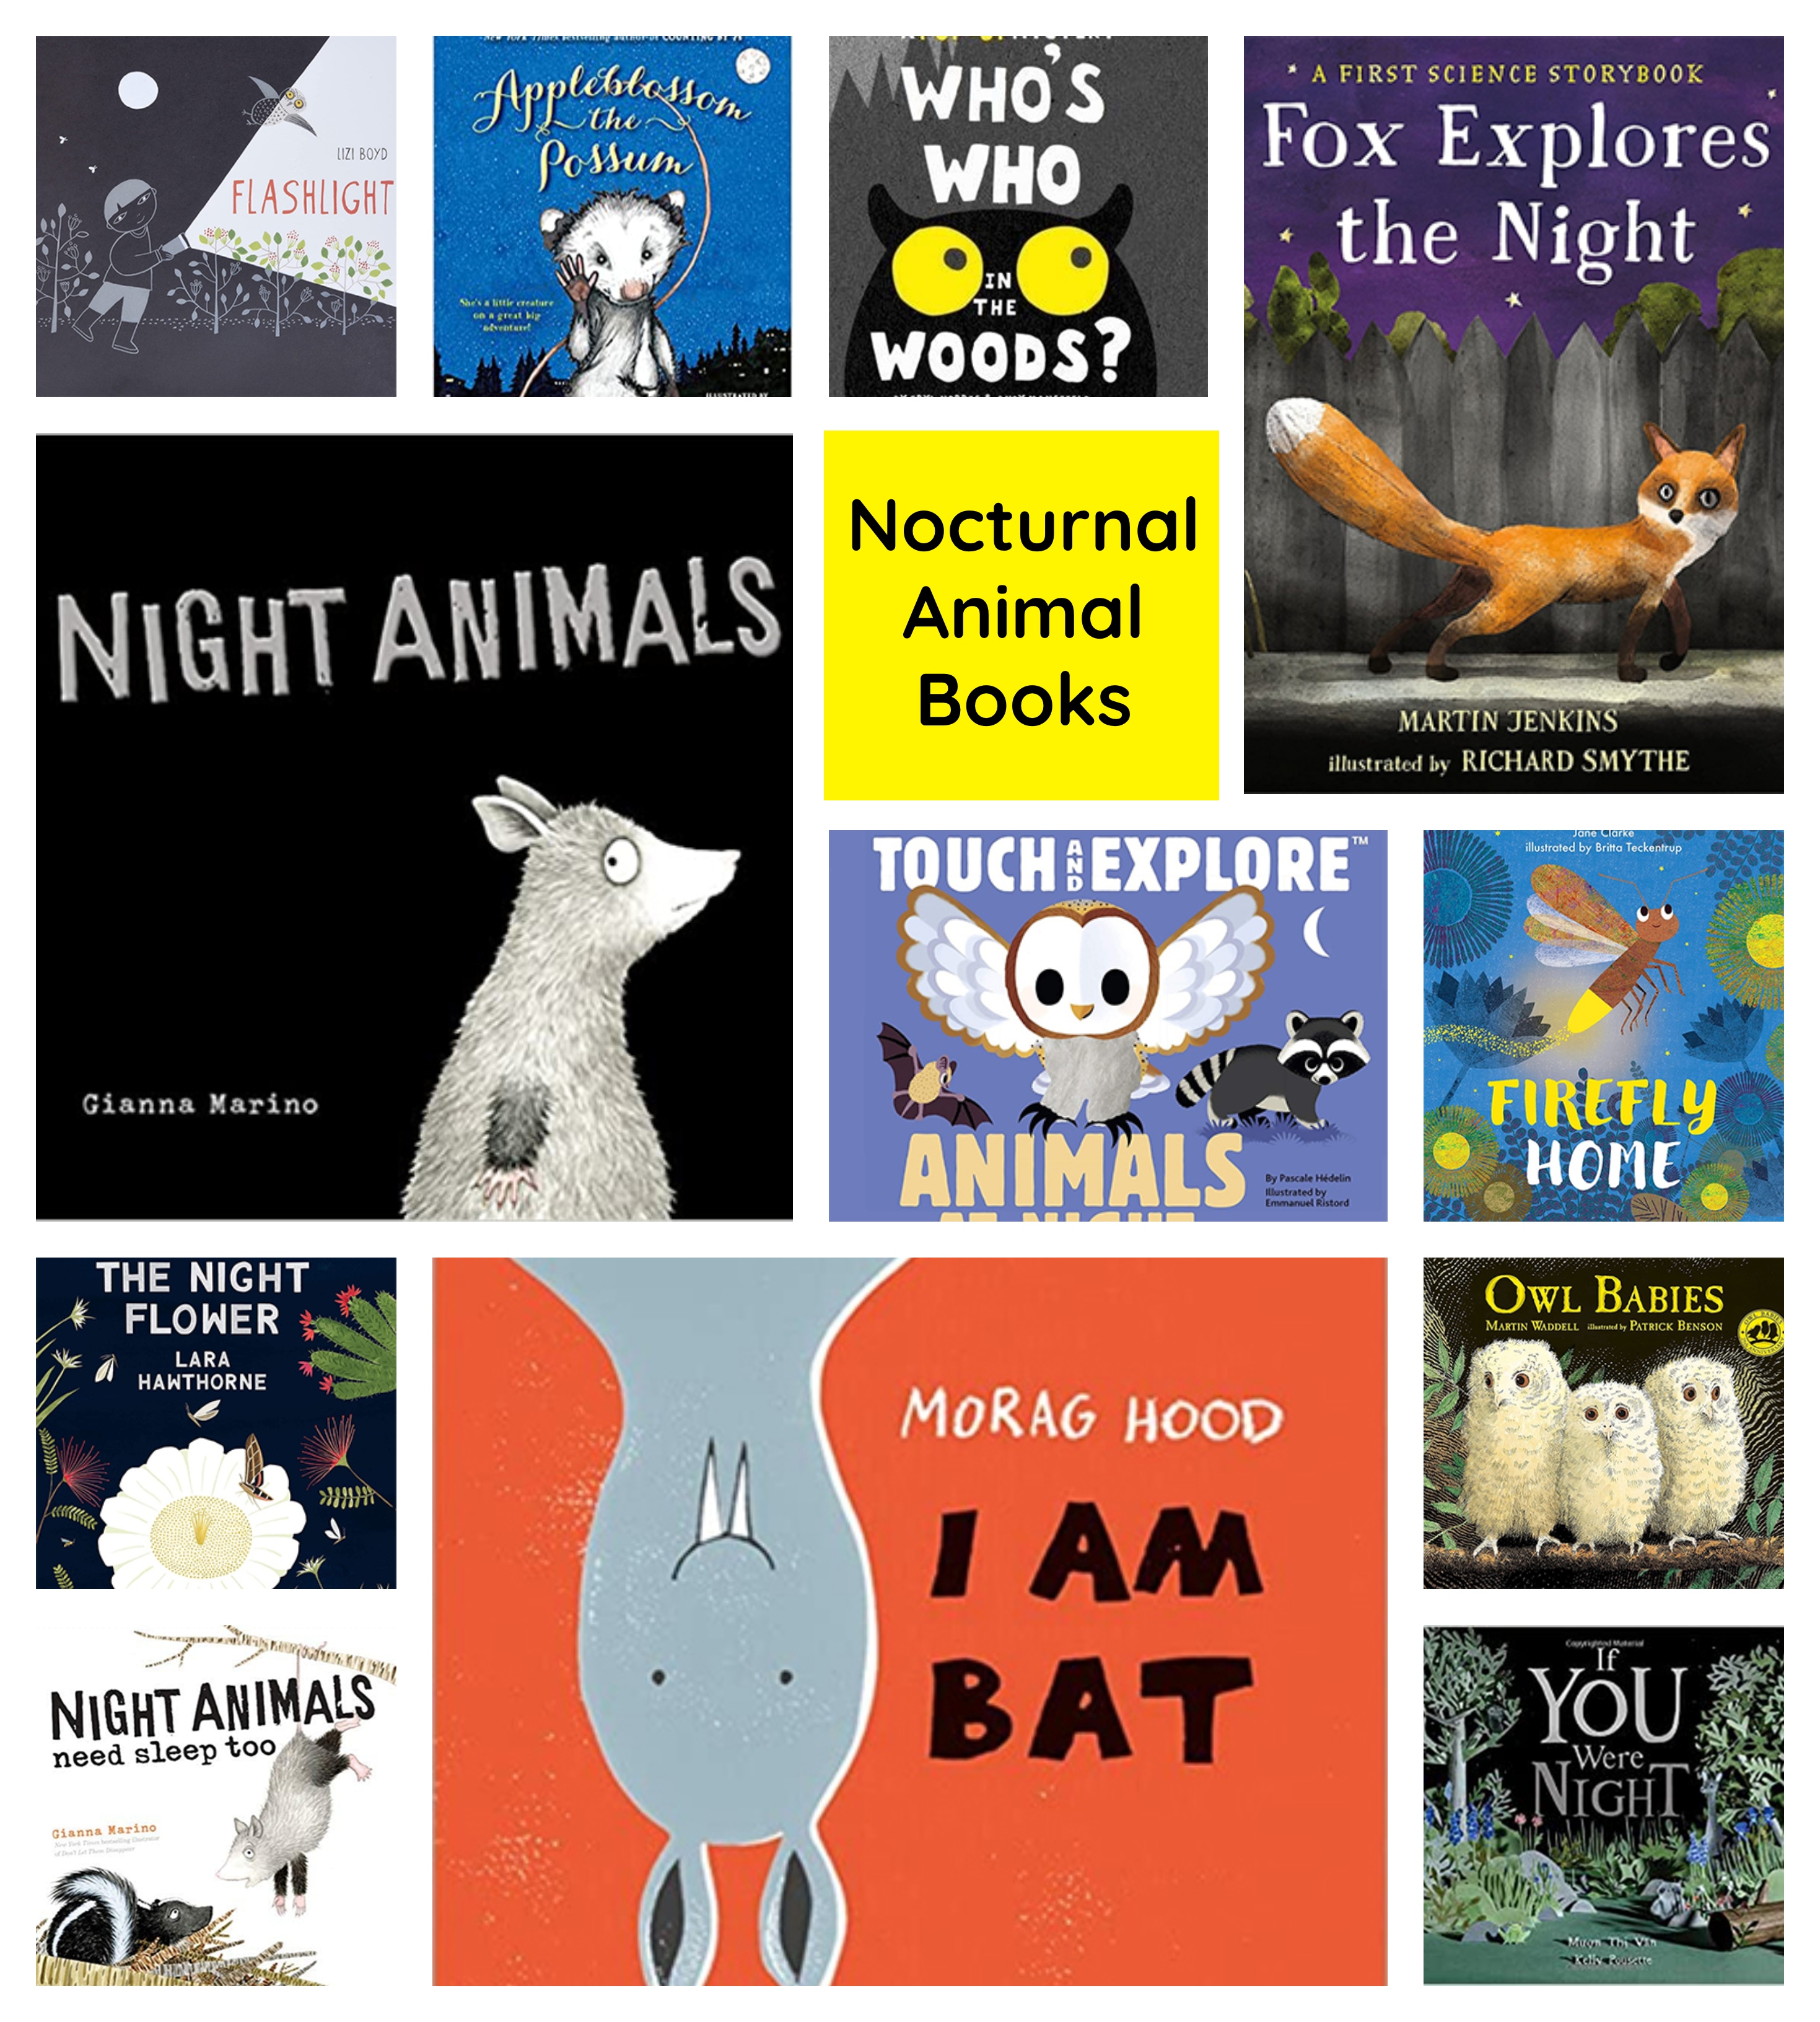 Nocturnal Animal Books